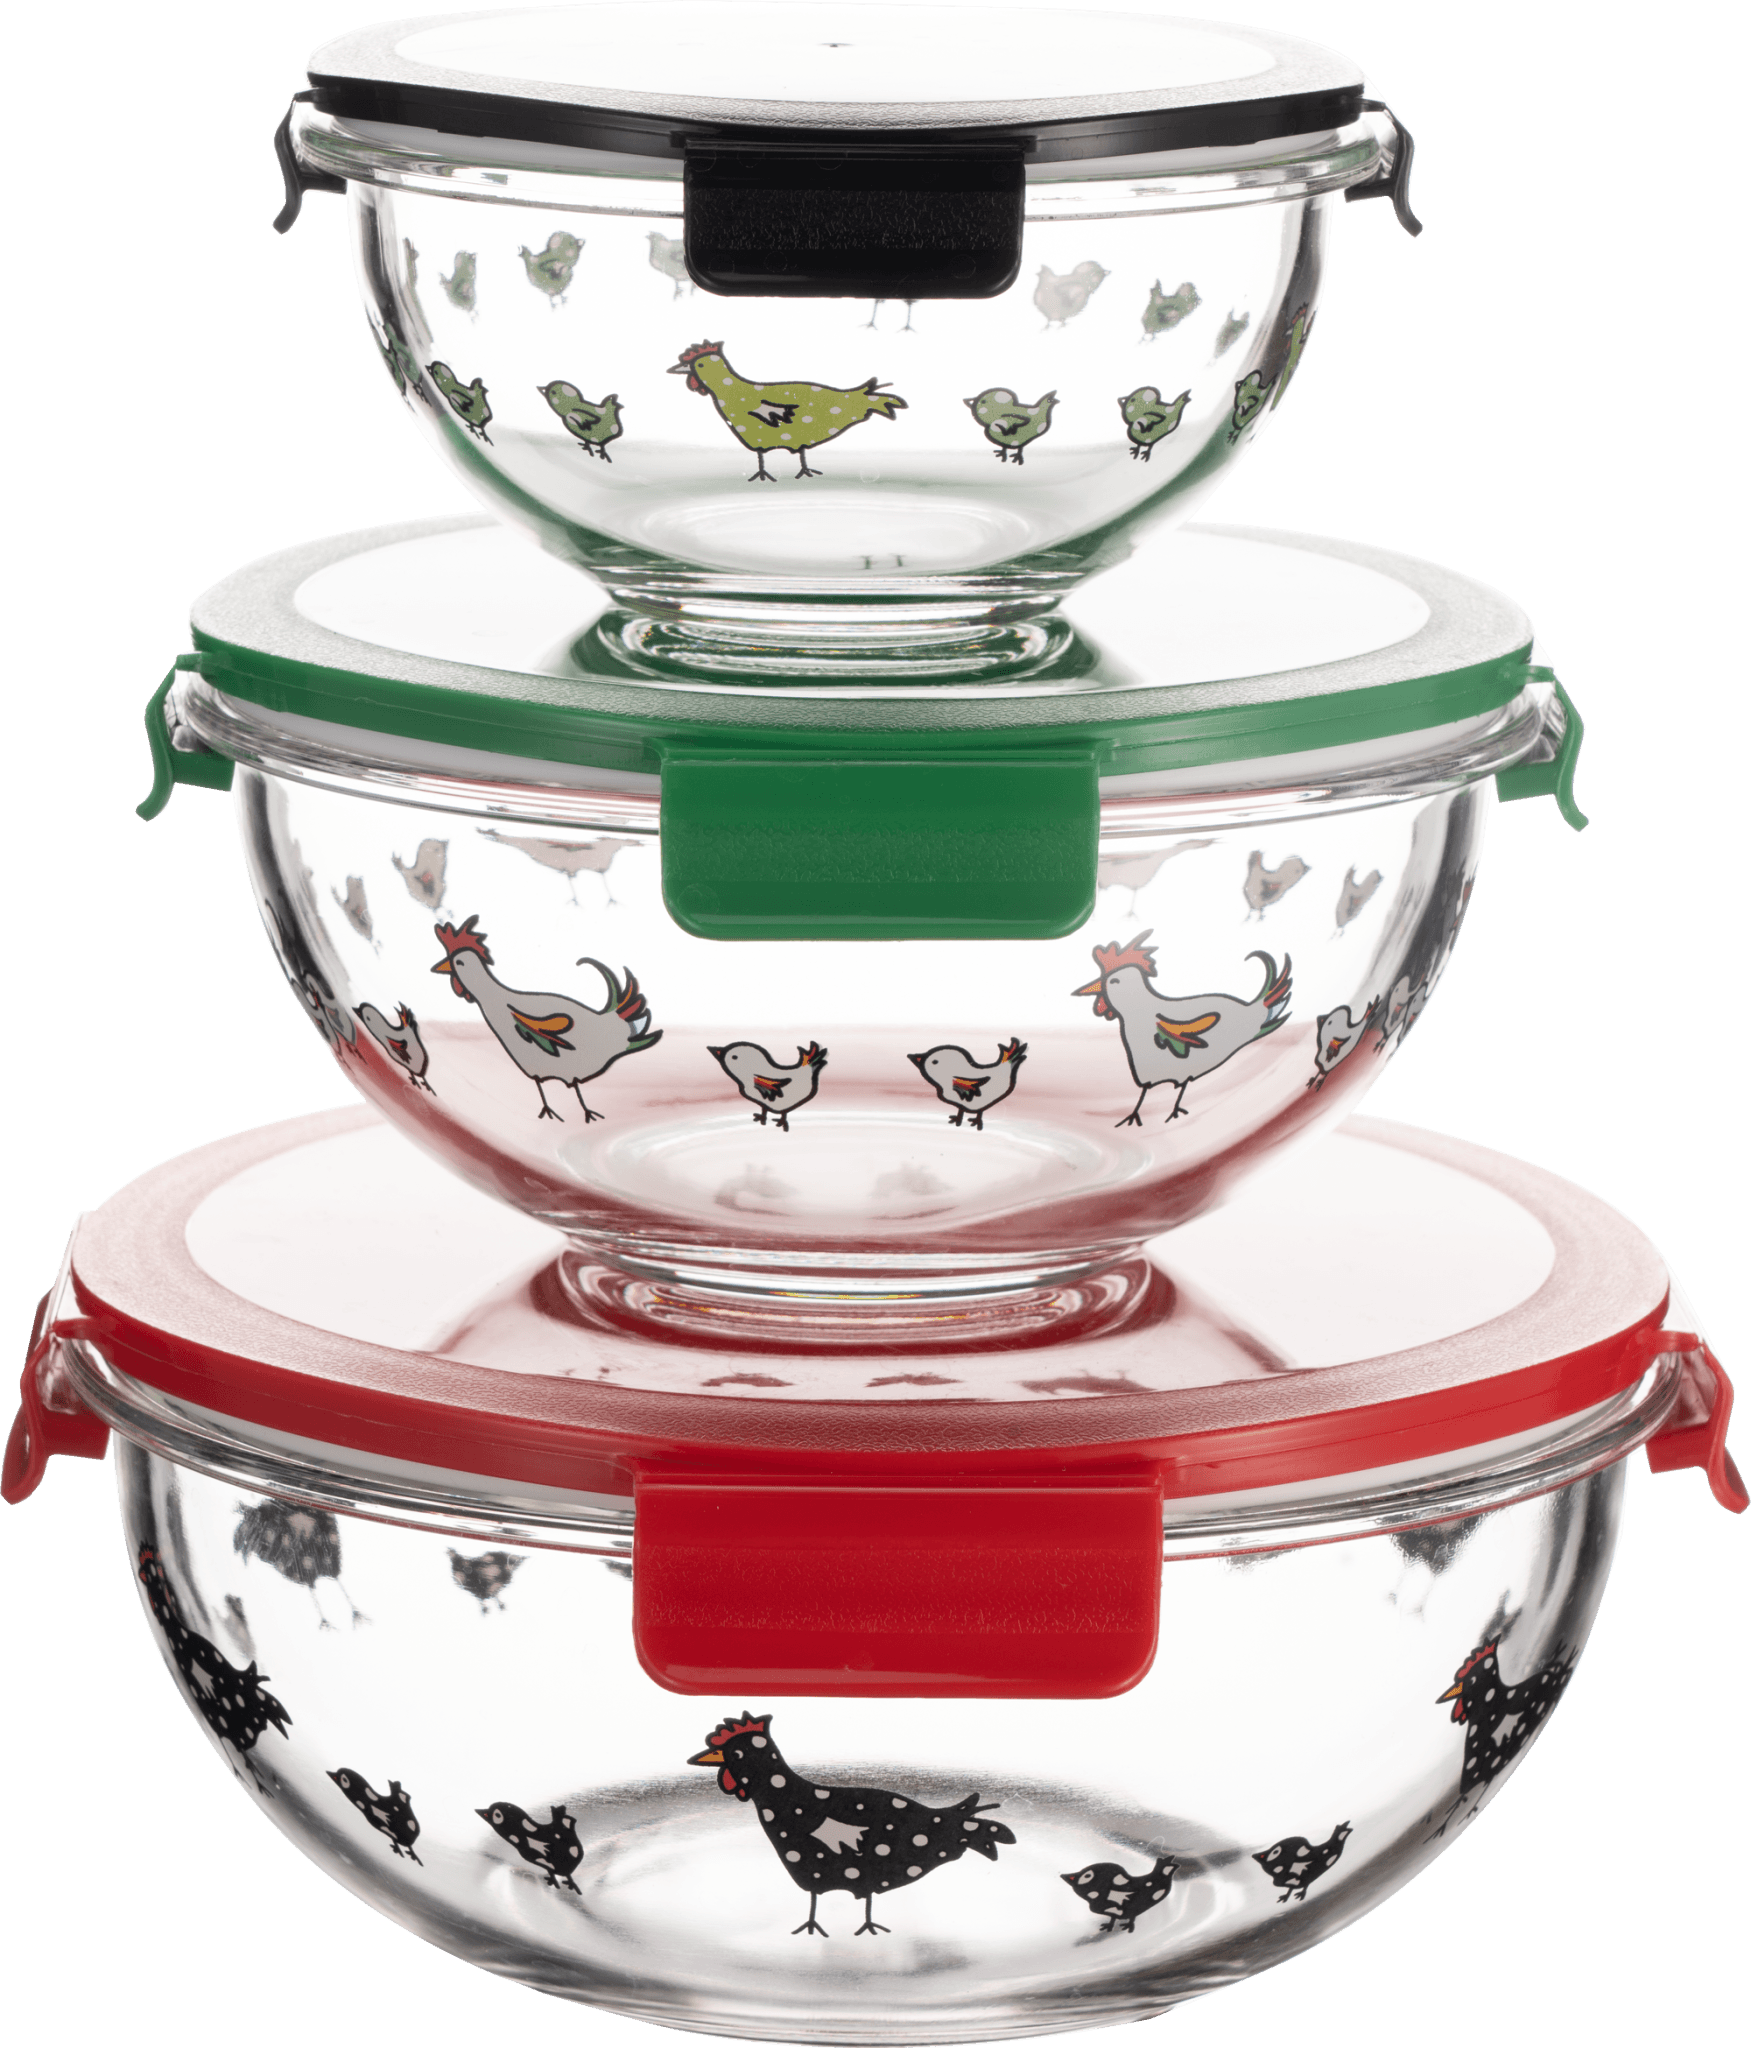 https://genicook.com/cdn/shop/products/round-borosilicate-glass-nesting-saladmixing-bowl-set-with-snap-on-lids-3-container-setgenicookmxl601rs-225830.png?v=1678245134